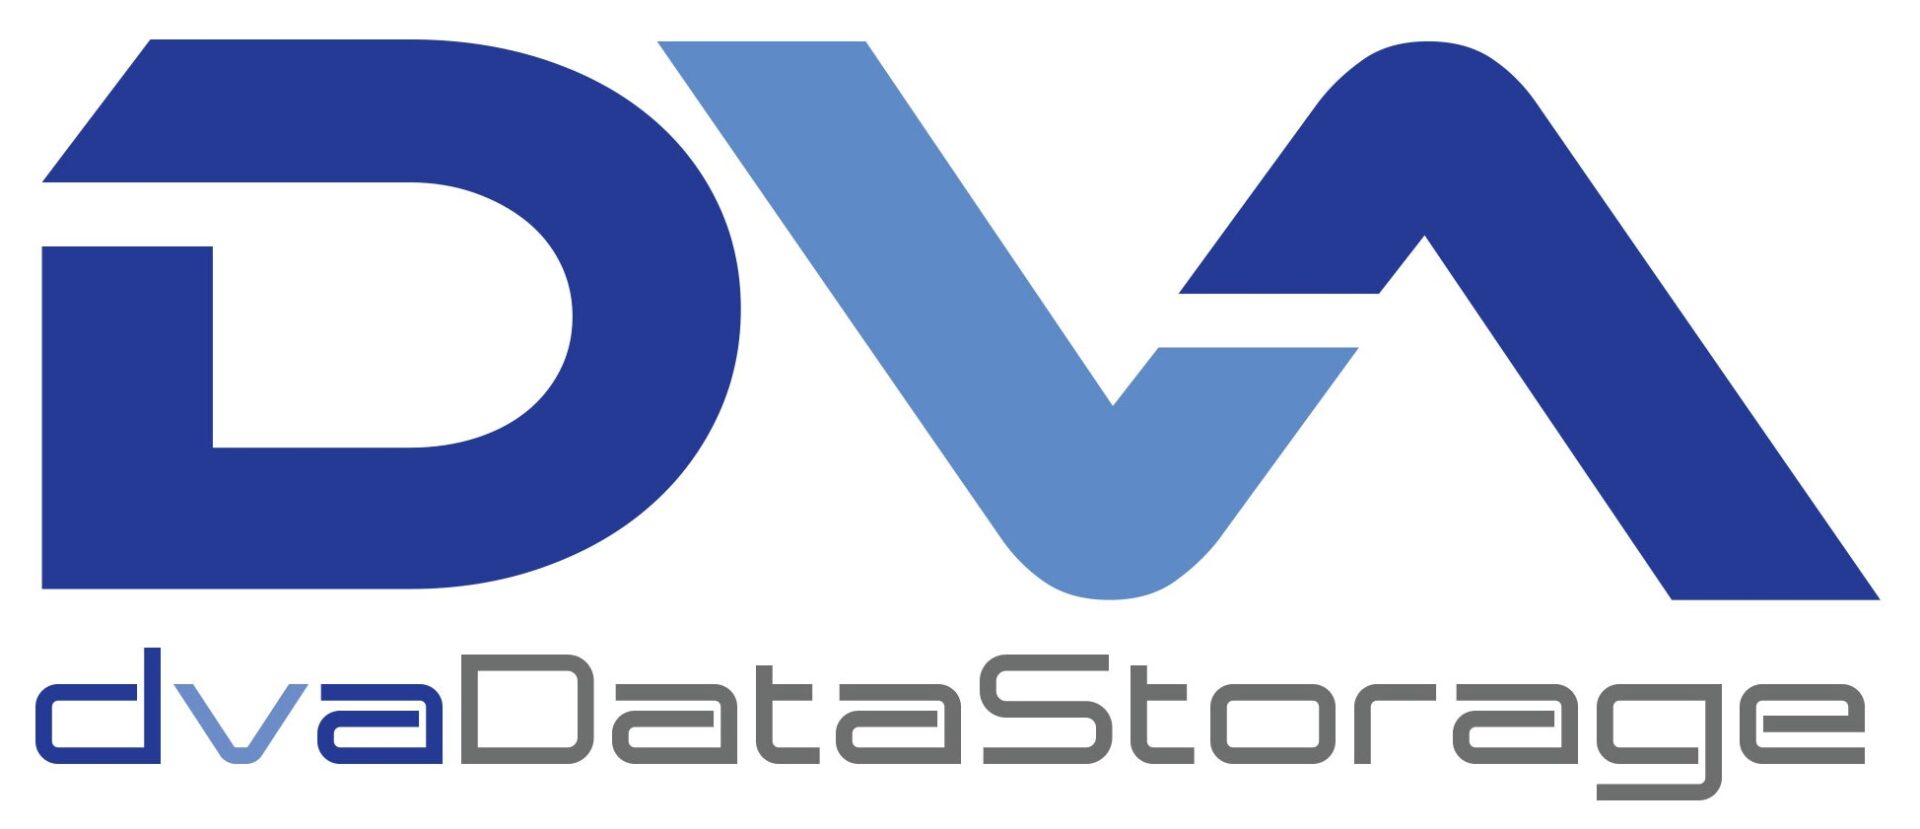 A logo of data storage is shown.